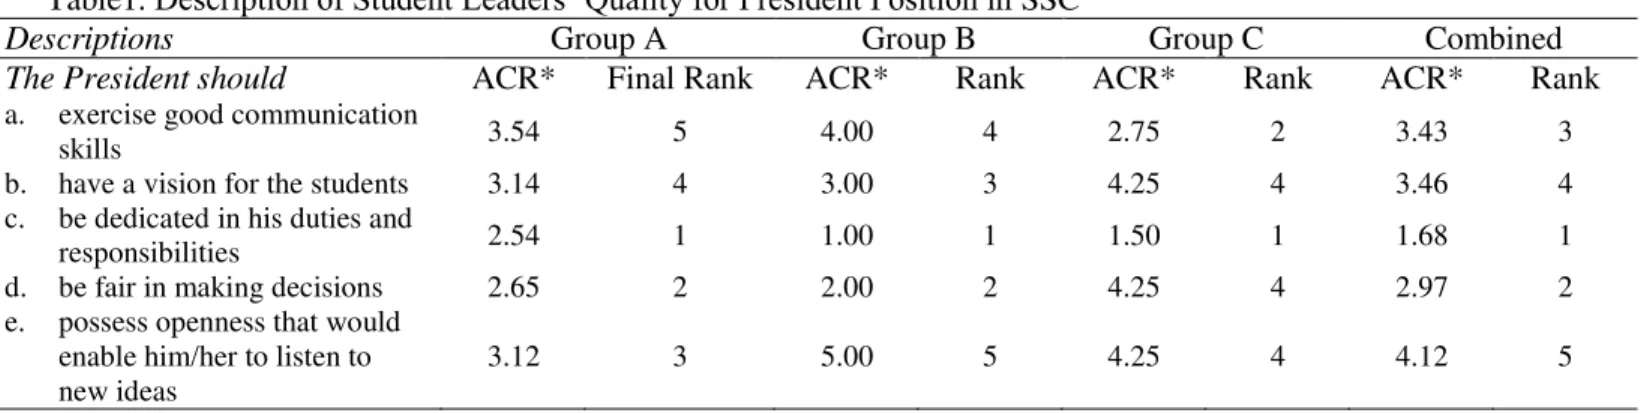 Table 2. Coded Responses of the Respondents on the Qualities of President for Student Council Position 